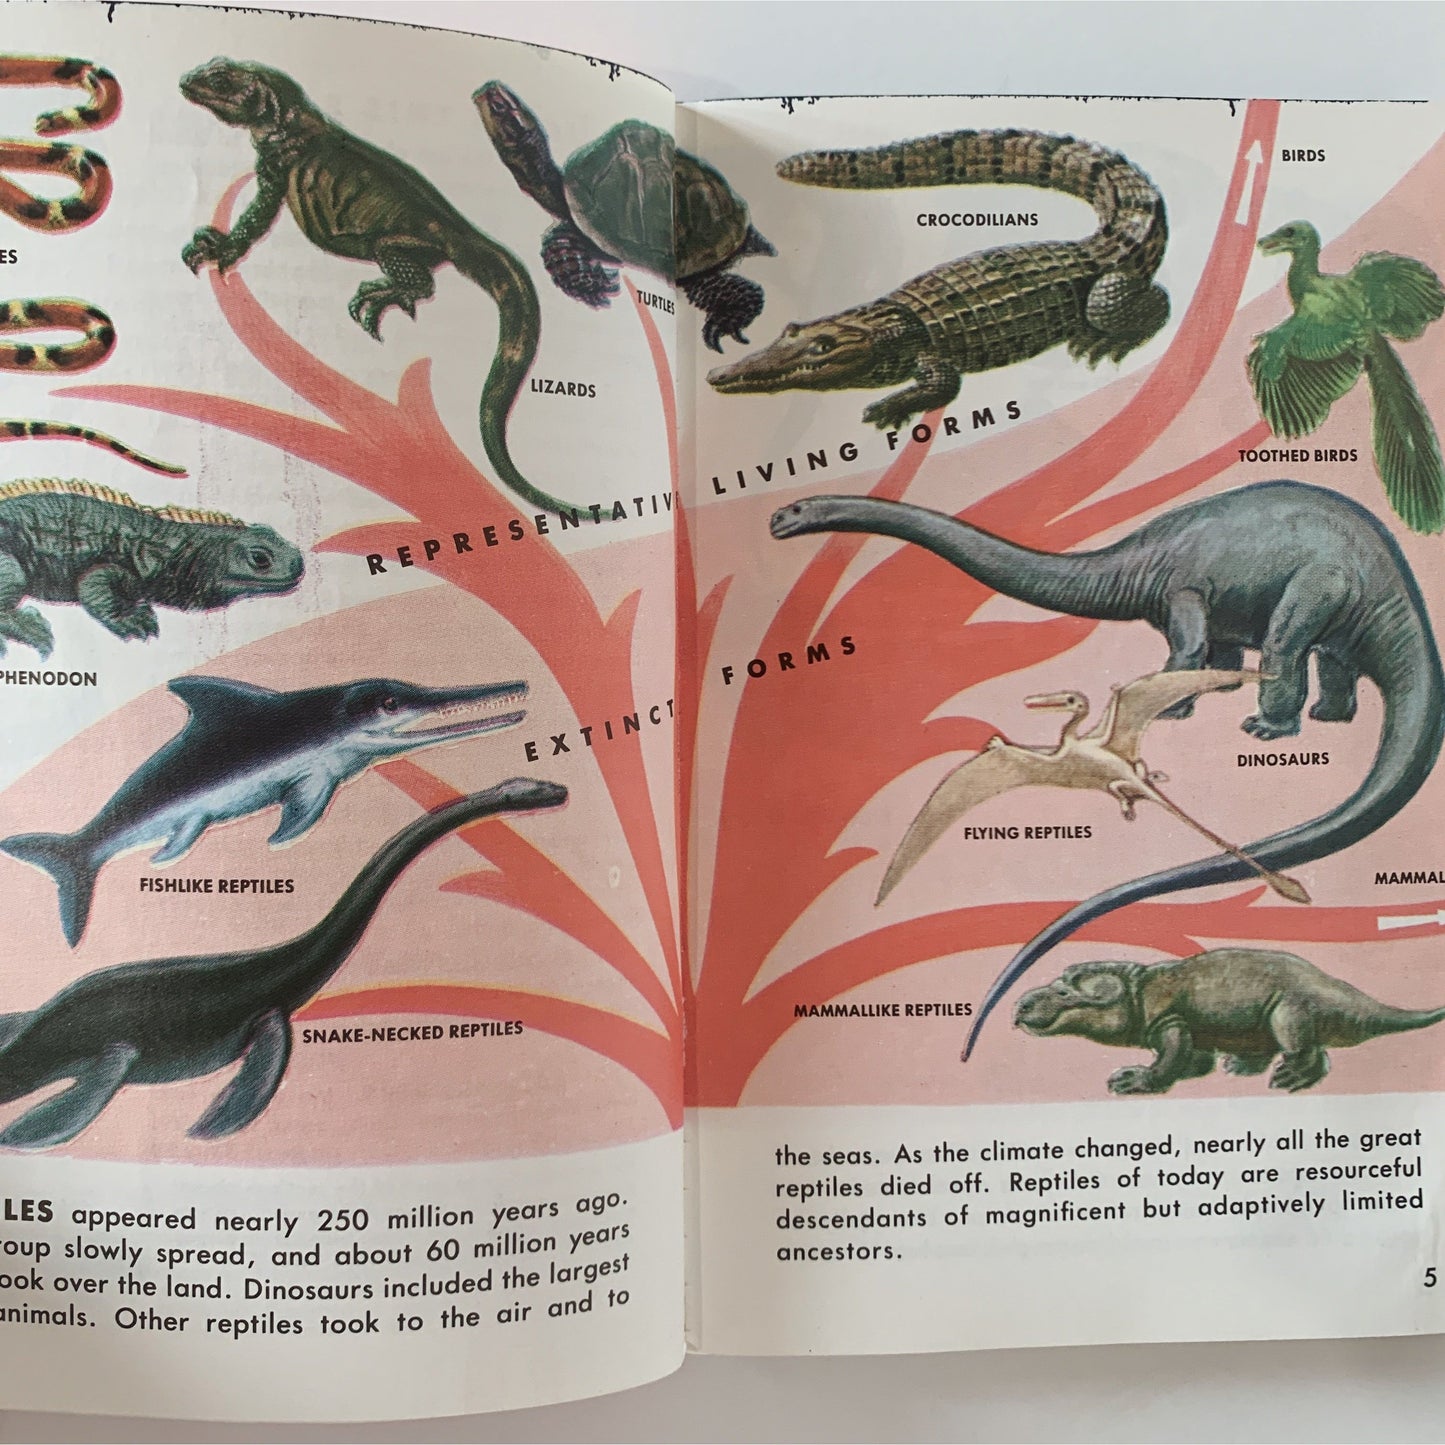 Reptiles and Amphibians A Golden Guide Paperback 1987